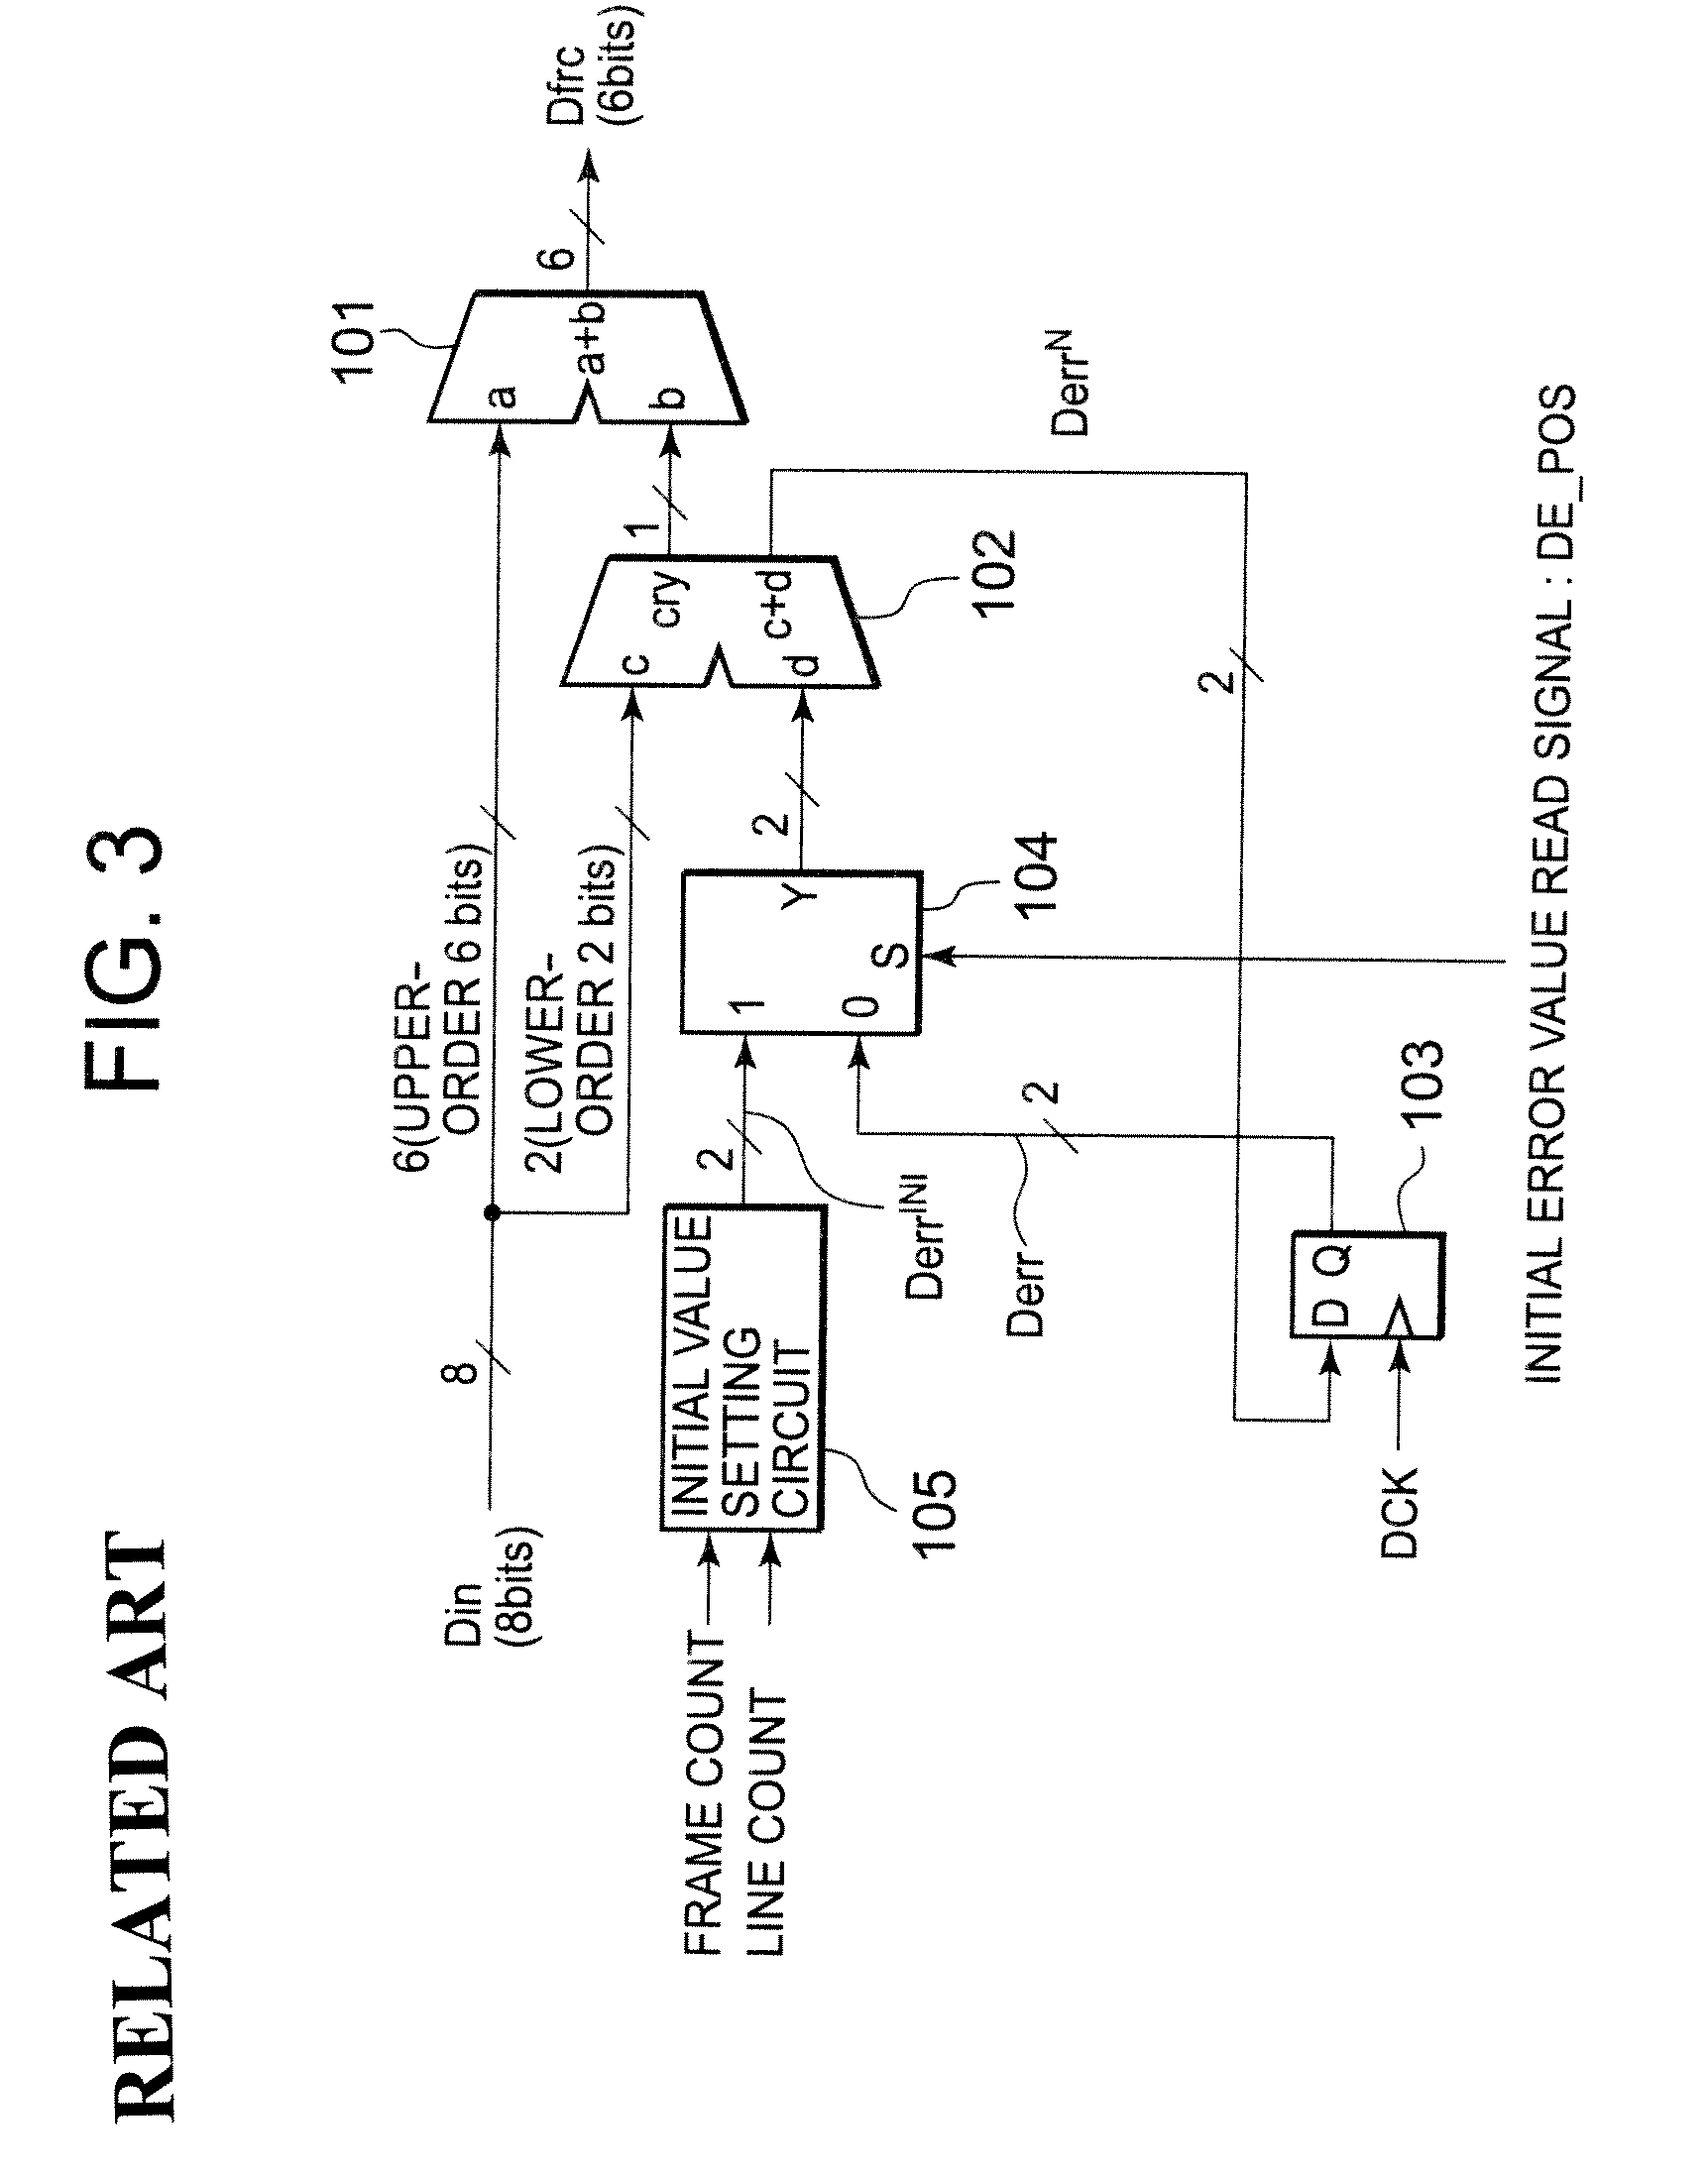 Display apparatus and display panel driver including subtractive color processing circuit for error diffusion processing and weighting processing